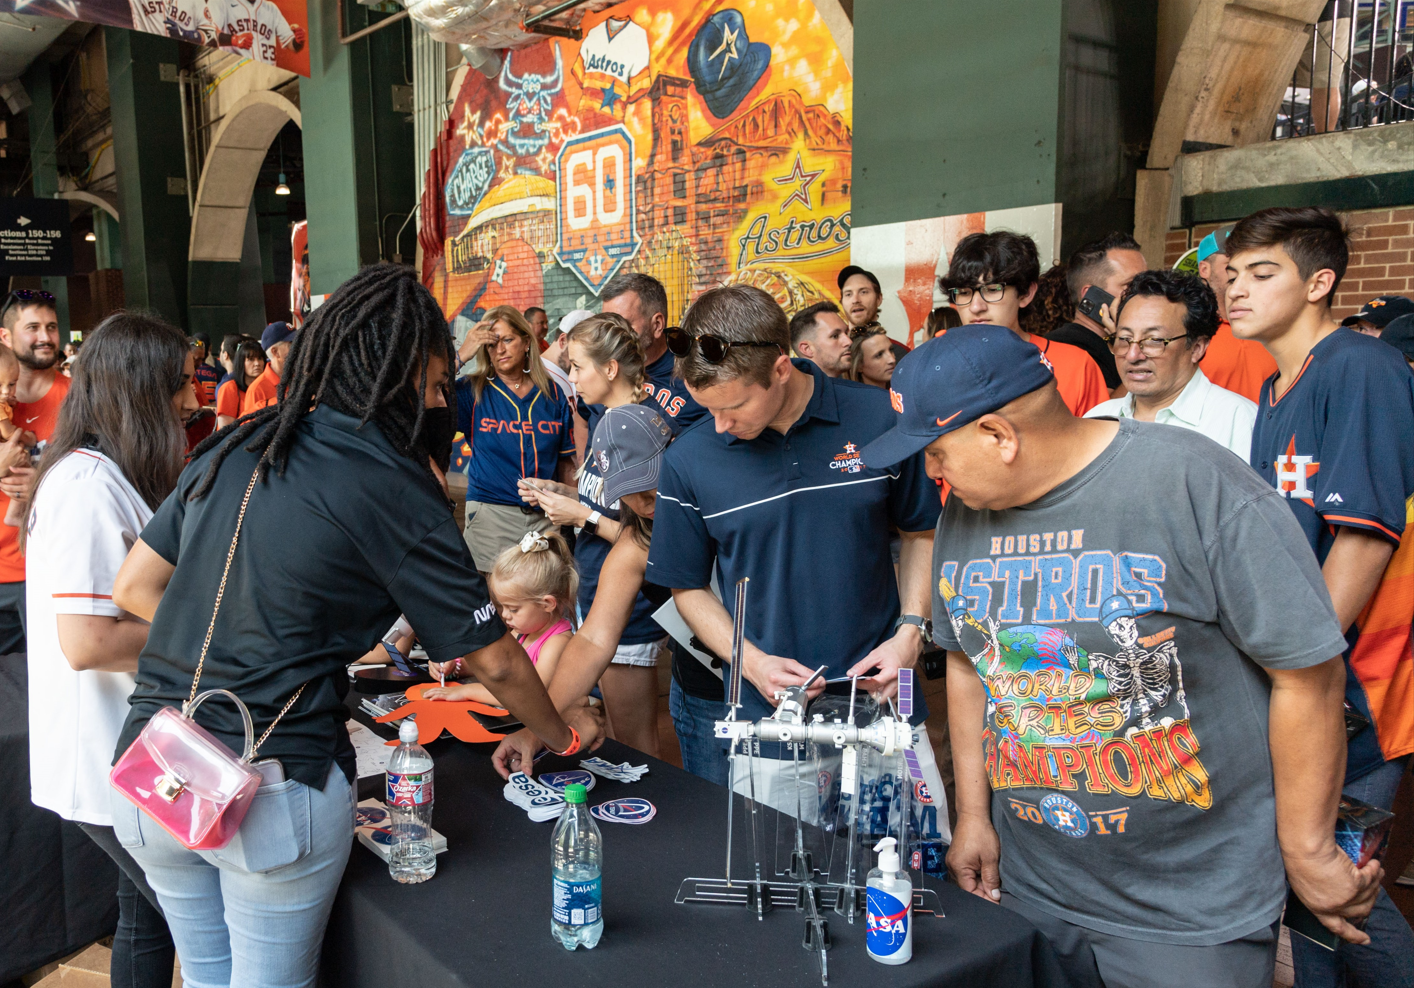 NASA Night (Well, Afternoon) with the Astros on Saturday, July 16